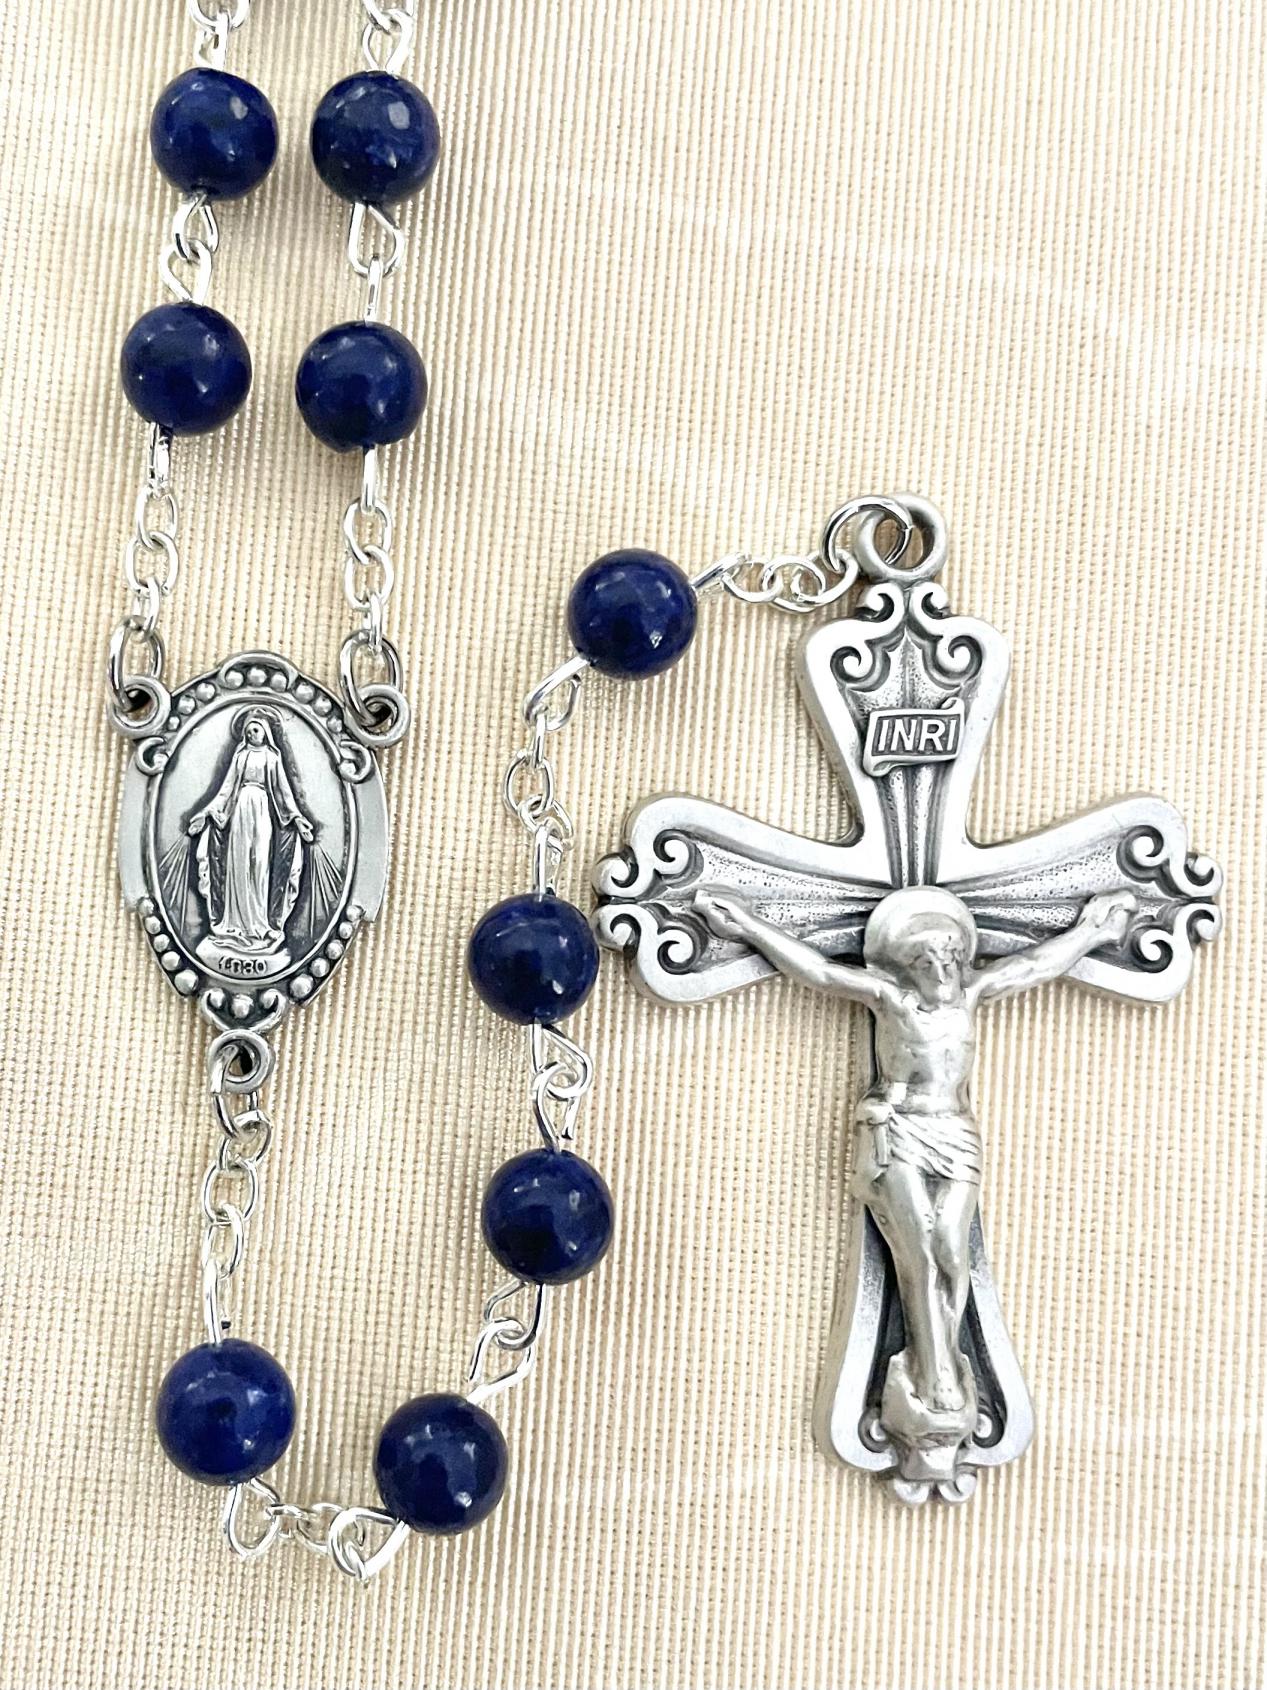 6mm LAPIS GEMSTONE ROSARY WITH STERLING SILVER CRUCIFIX AND CENTER GIFT BOXED